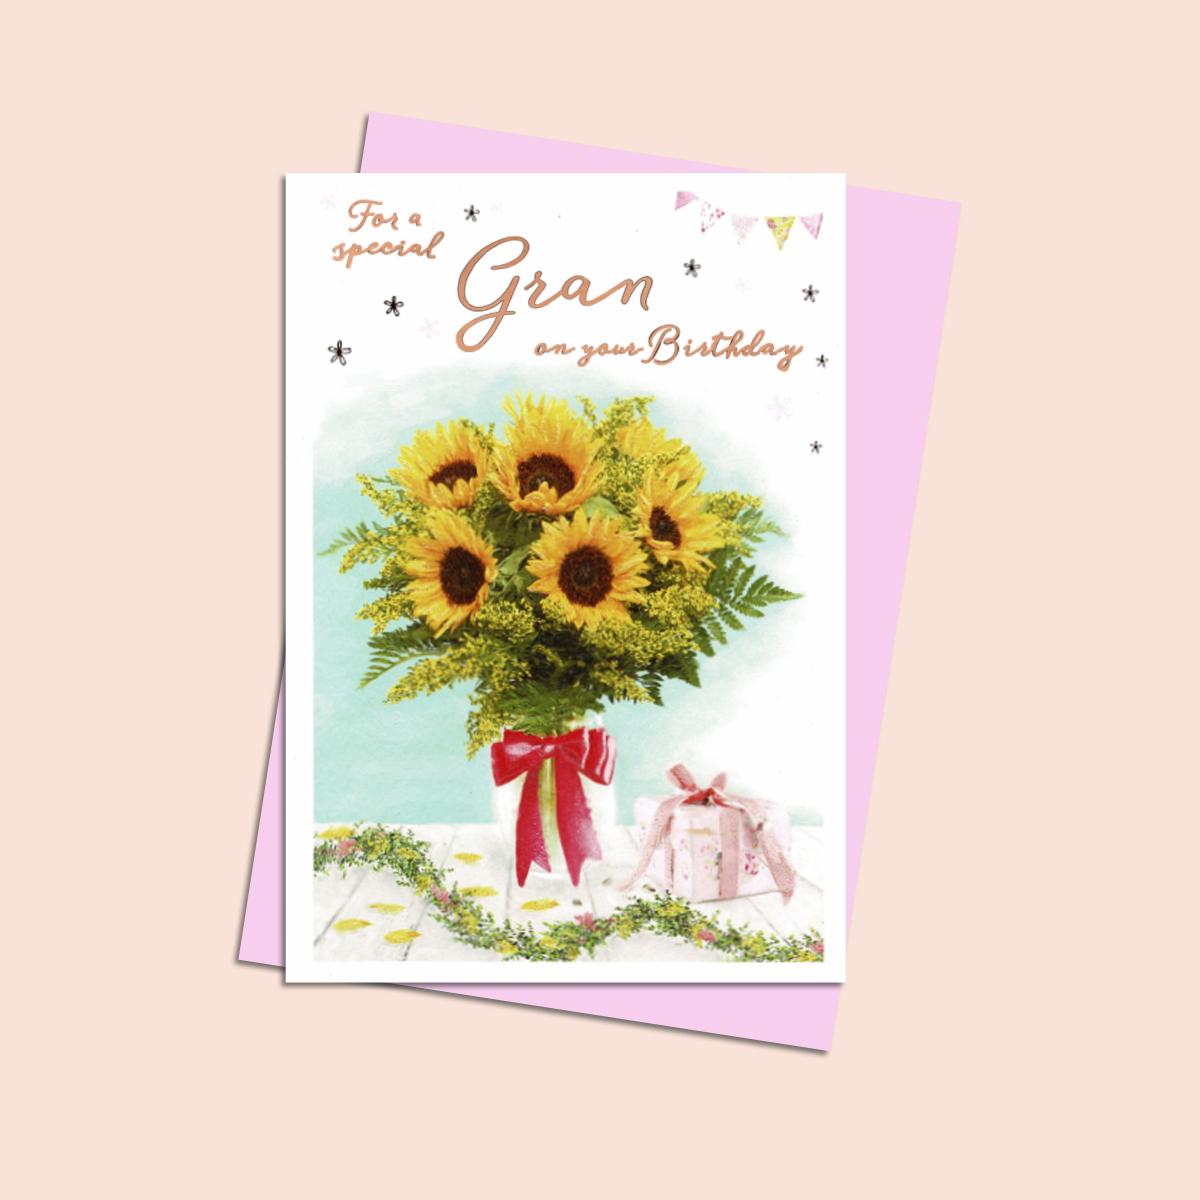 Gran Birthday Card Featuring A Large Bunch Of Yellow Sunflowers